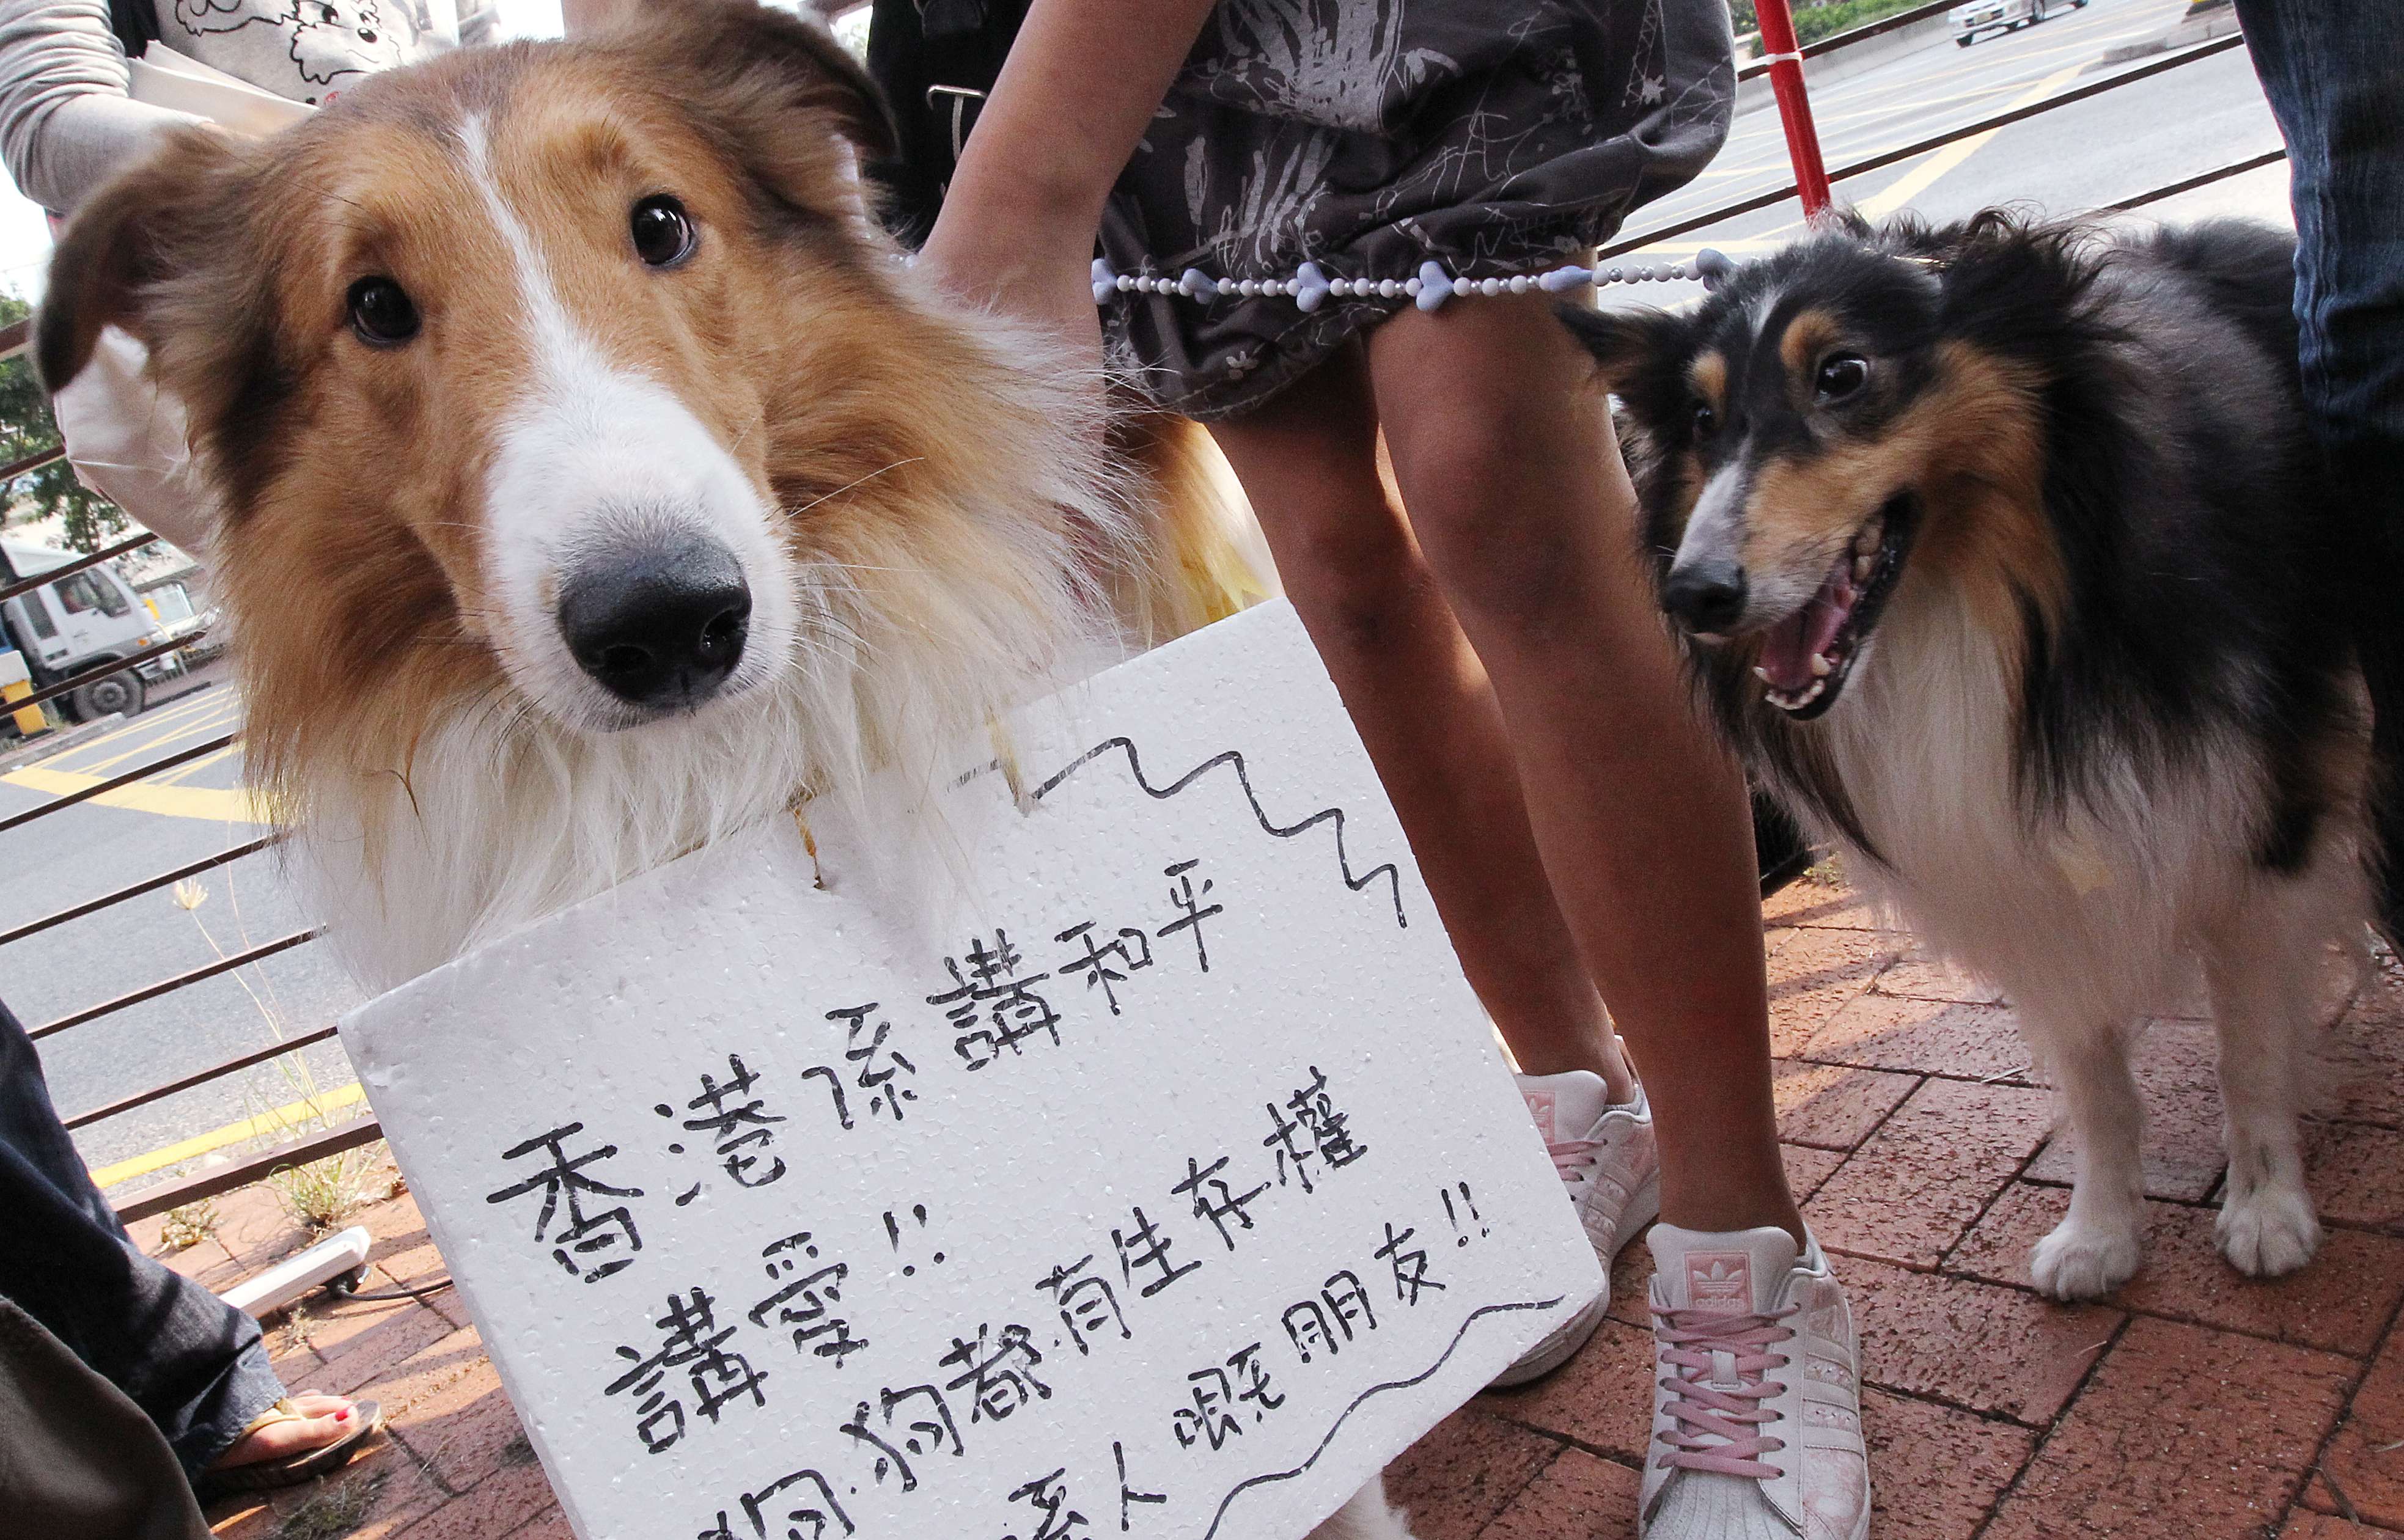 A protest at a private estate in 2010 when the owners’ committee voted to ban keeping pets in the estate. Photo: SCMP Pictures